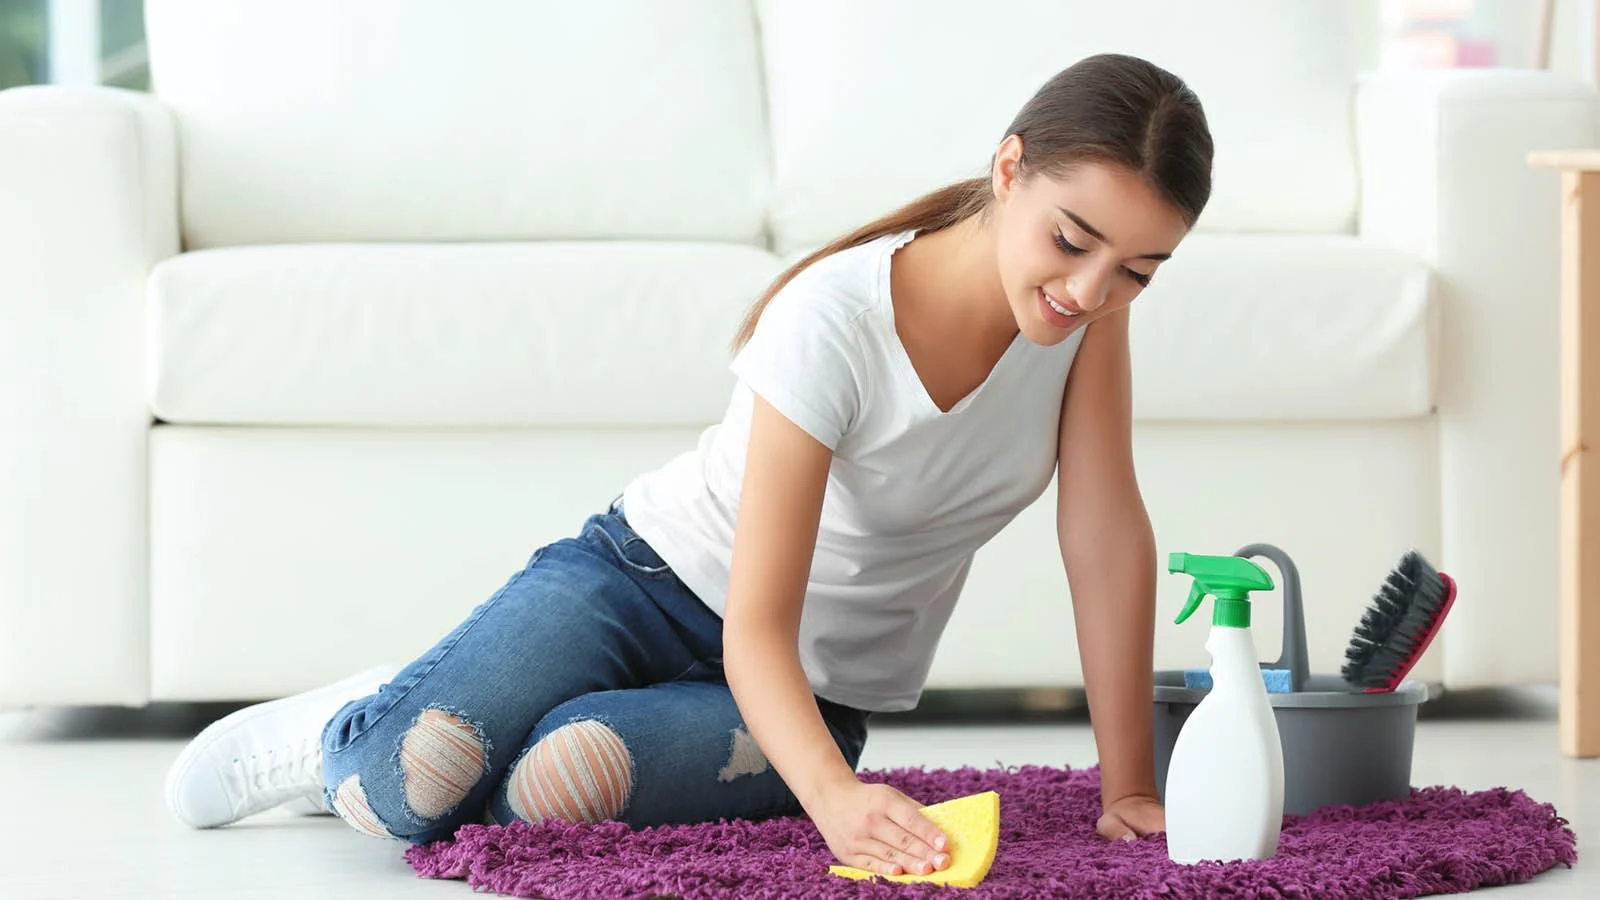 How To Get Insured For A Cleaning Business